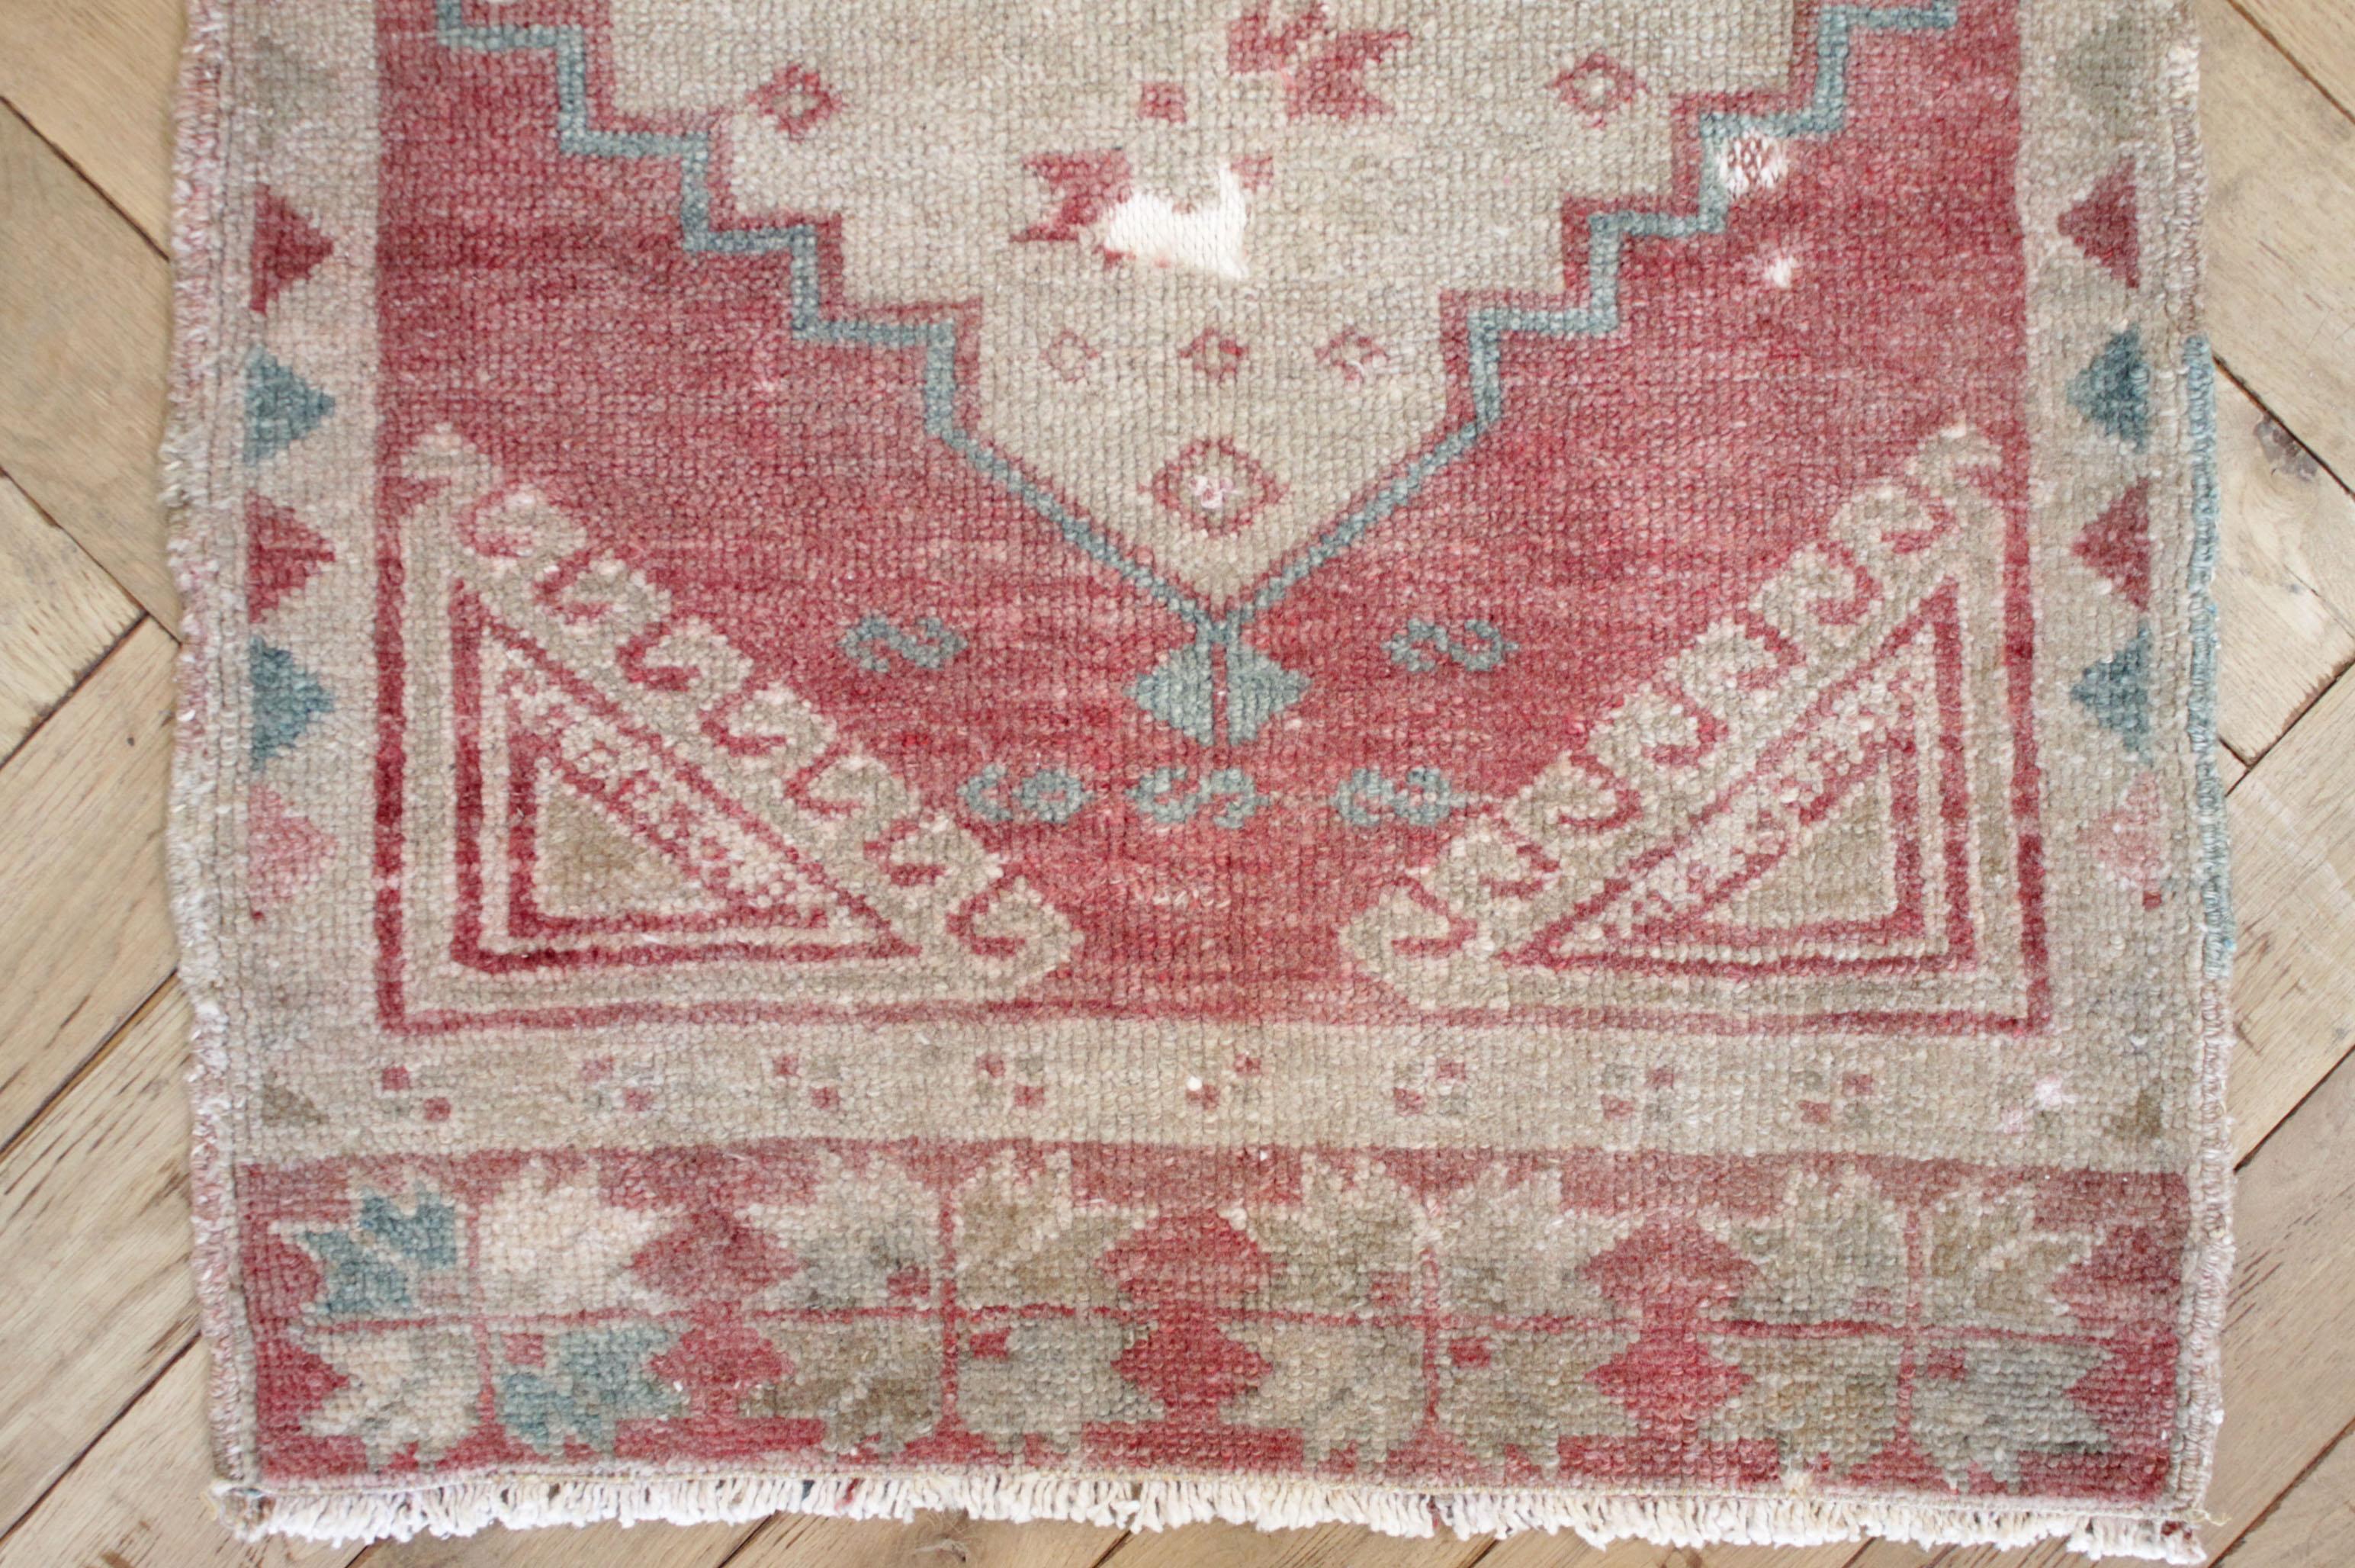 Small vintage Turkish accent rug
Measures: 22